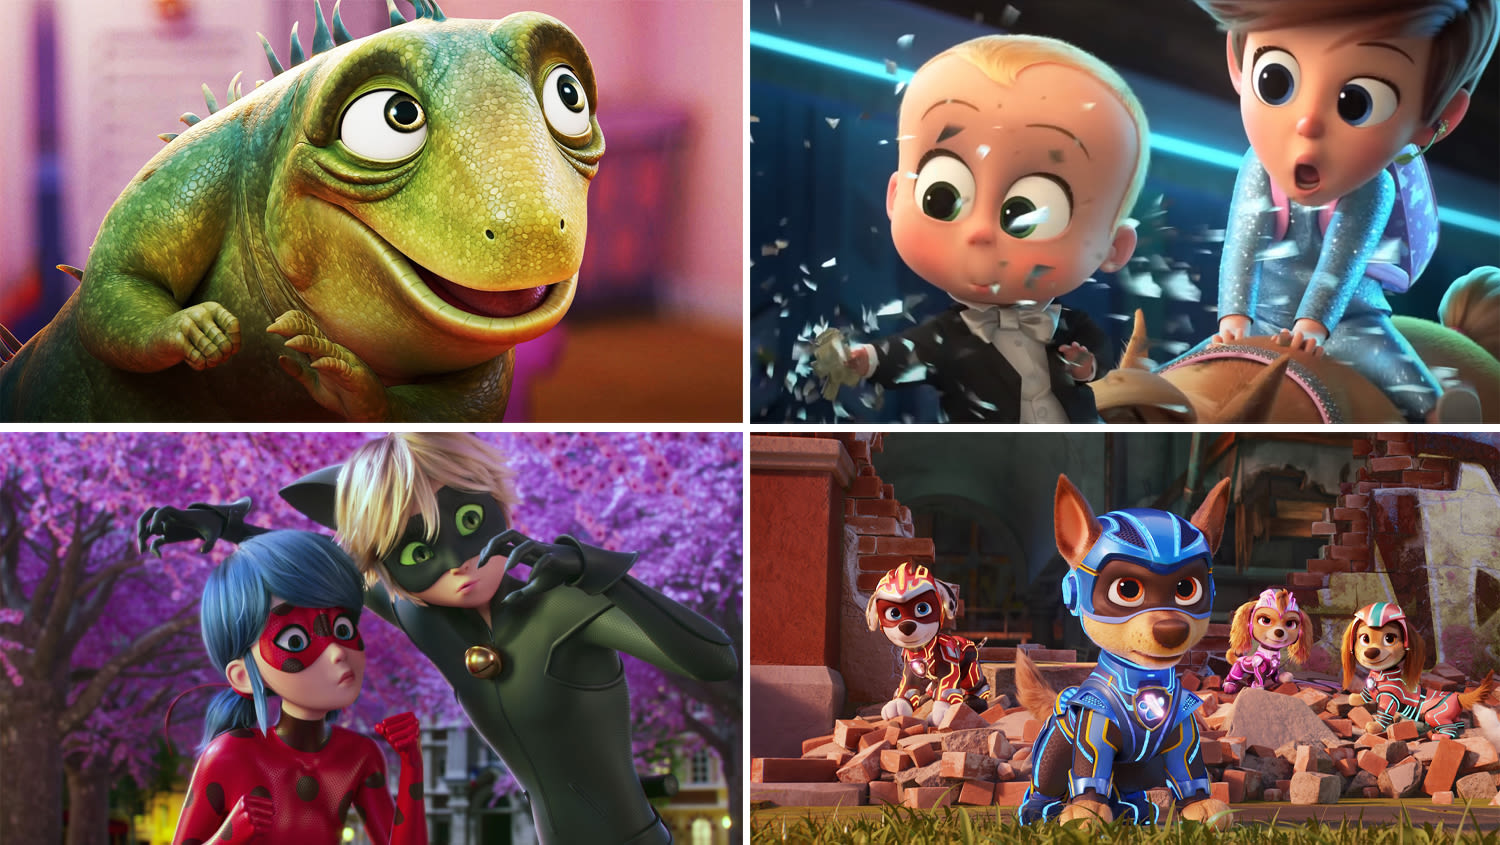 Animated Films Are 33 Of The Most Watched In Netflix’s New Data Dump: How Streamer’s Originals Stacked Up Against...